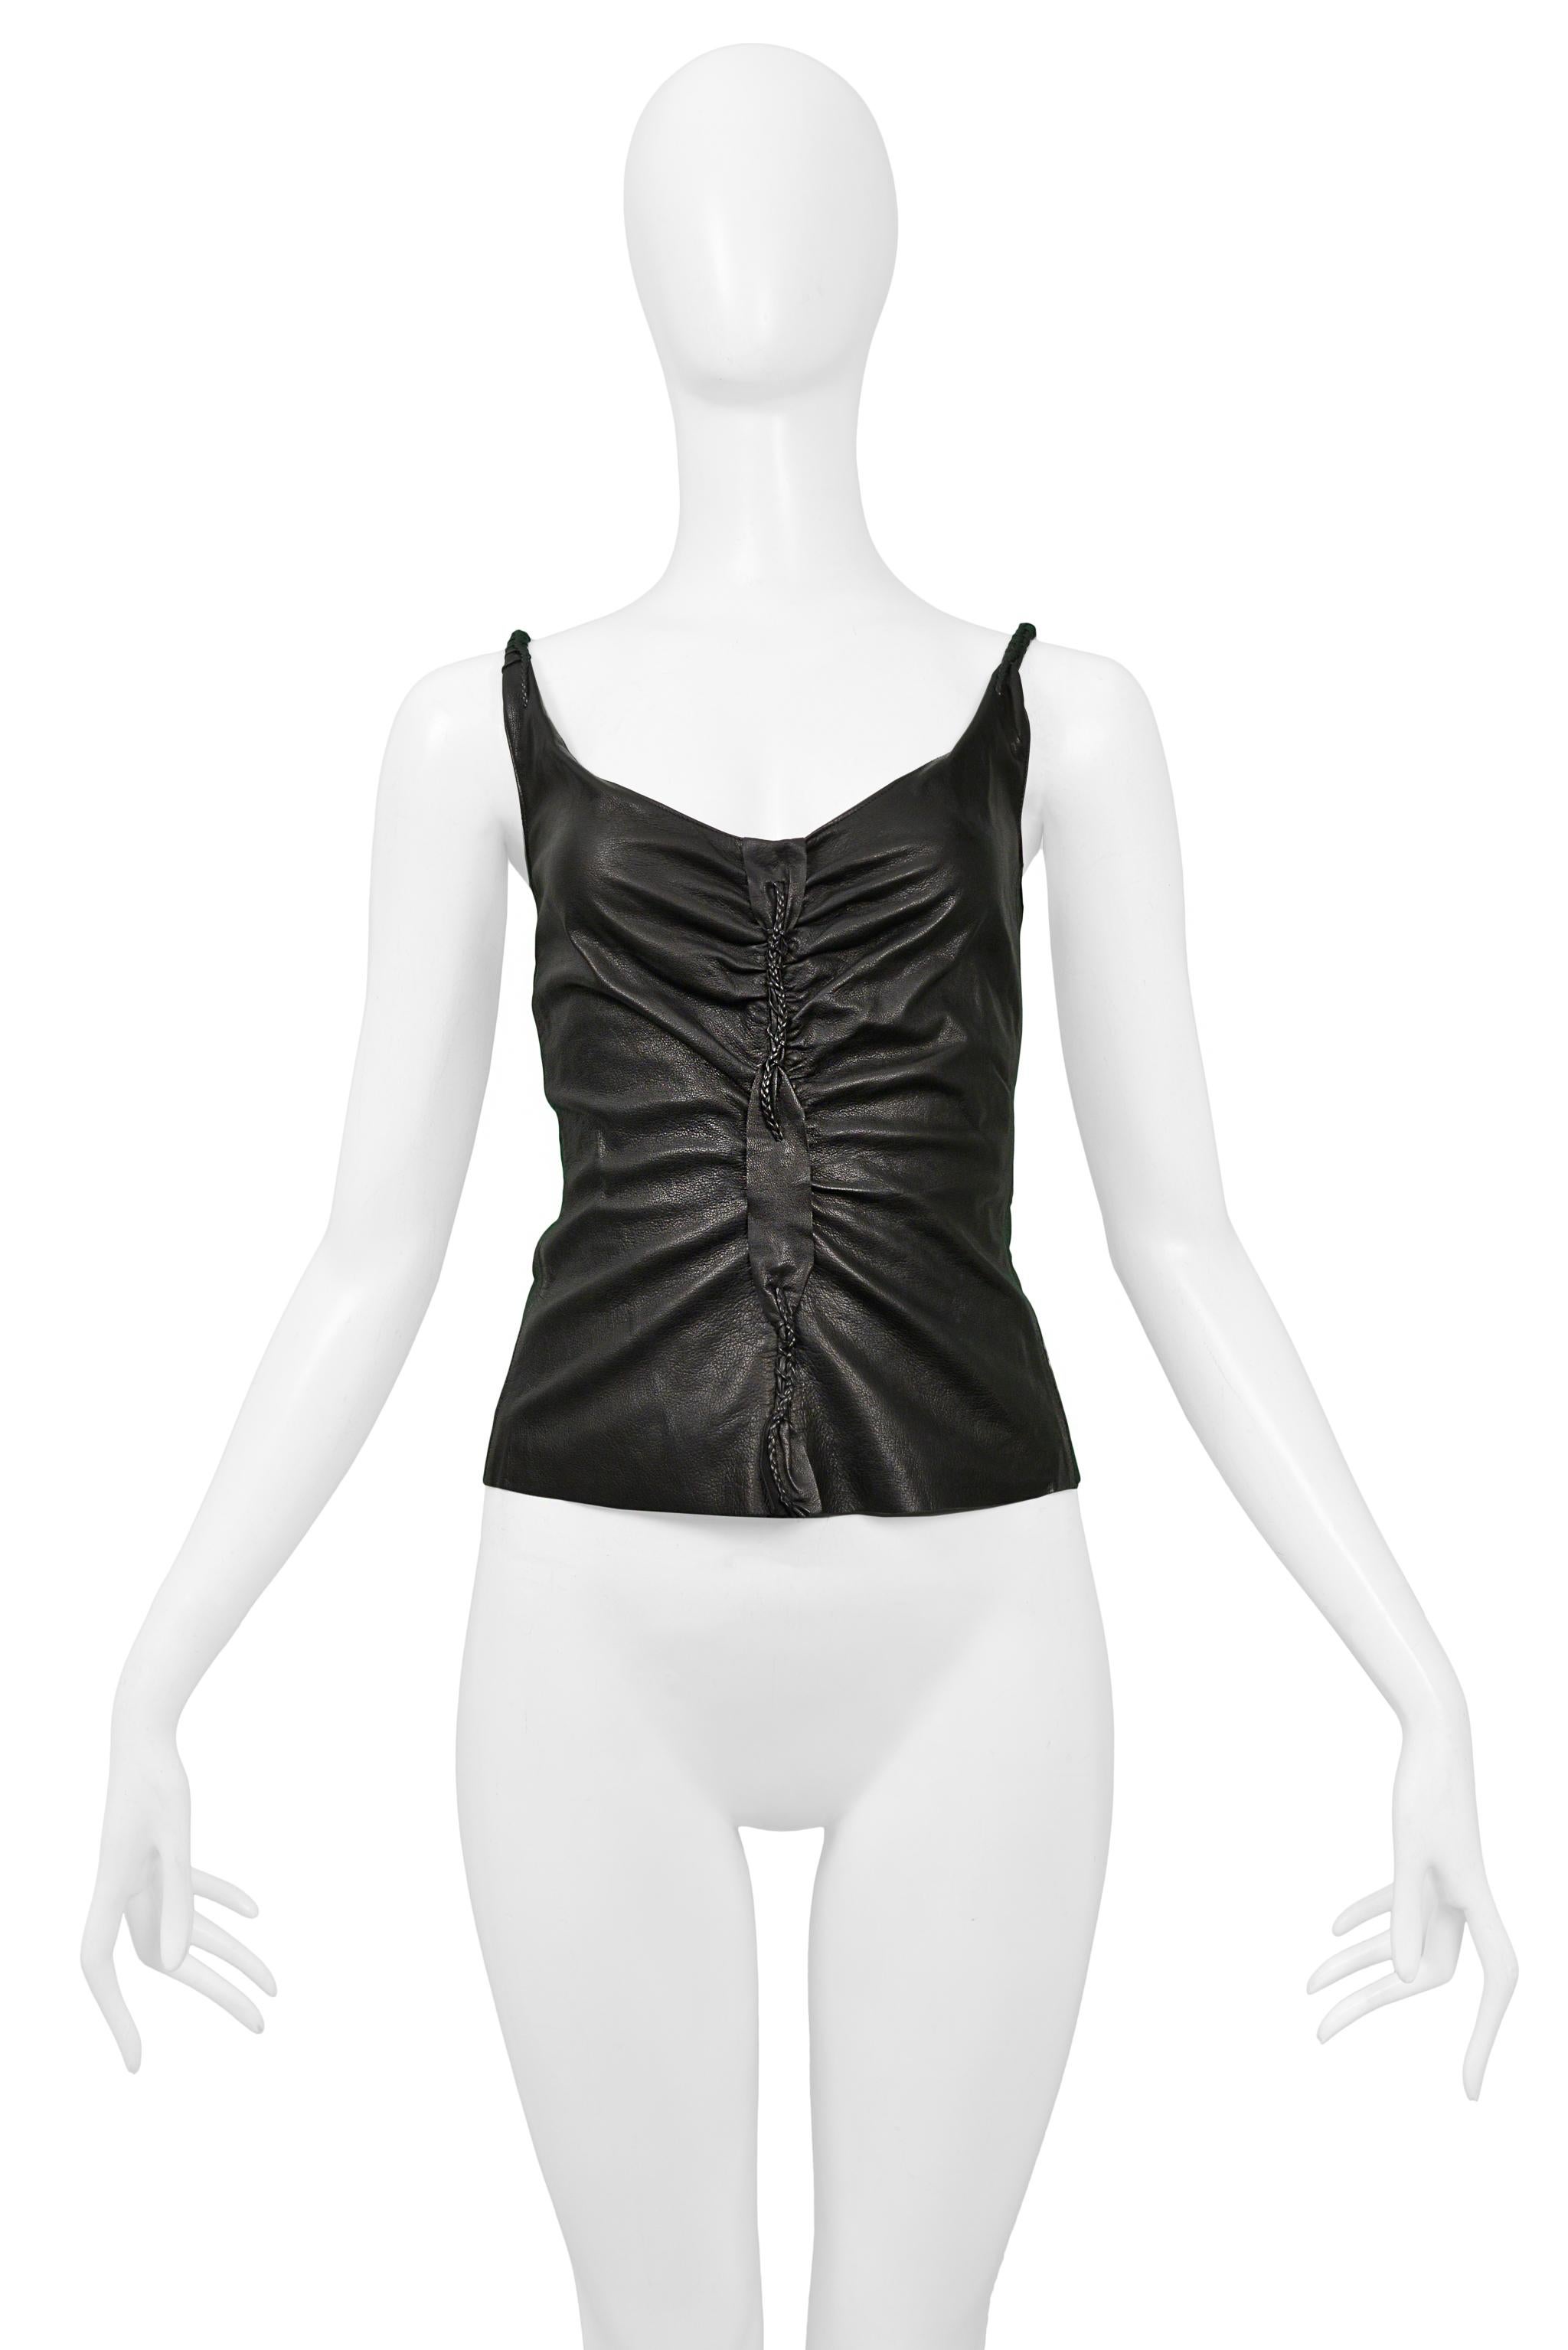 Resurrection Vintage is excited to offer a vintage black leather Tom Ford for Gucci tank top featuring a gathered back and center seam, braided detailing, and left back zipper closure.

Gucci
Designed by Tom Ford
Excellent Vintage